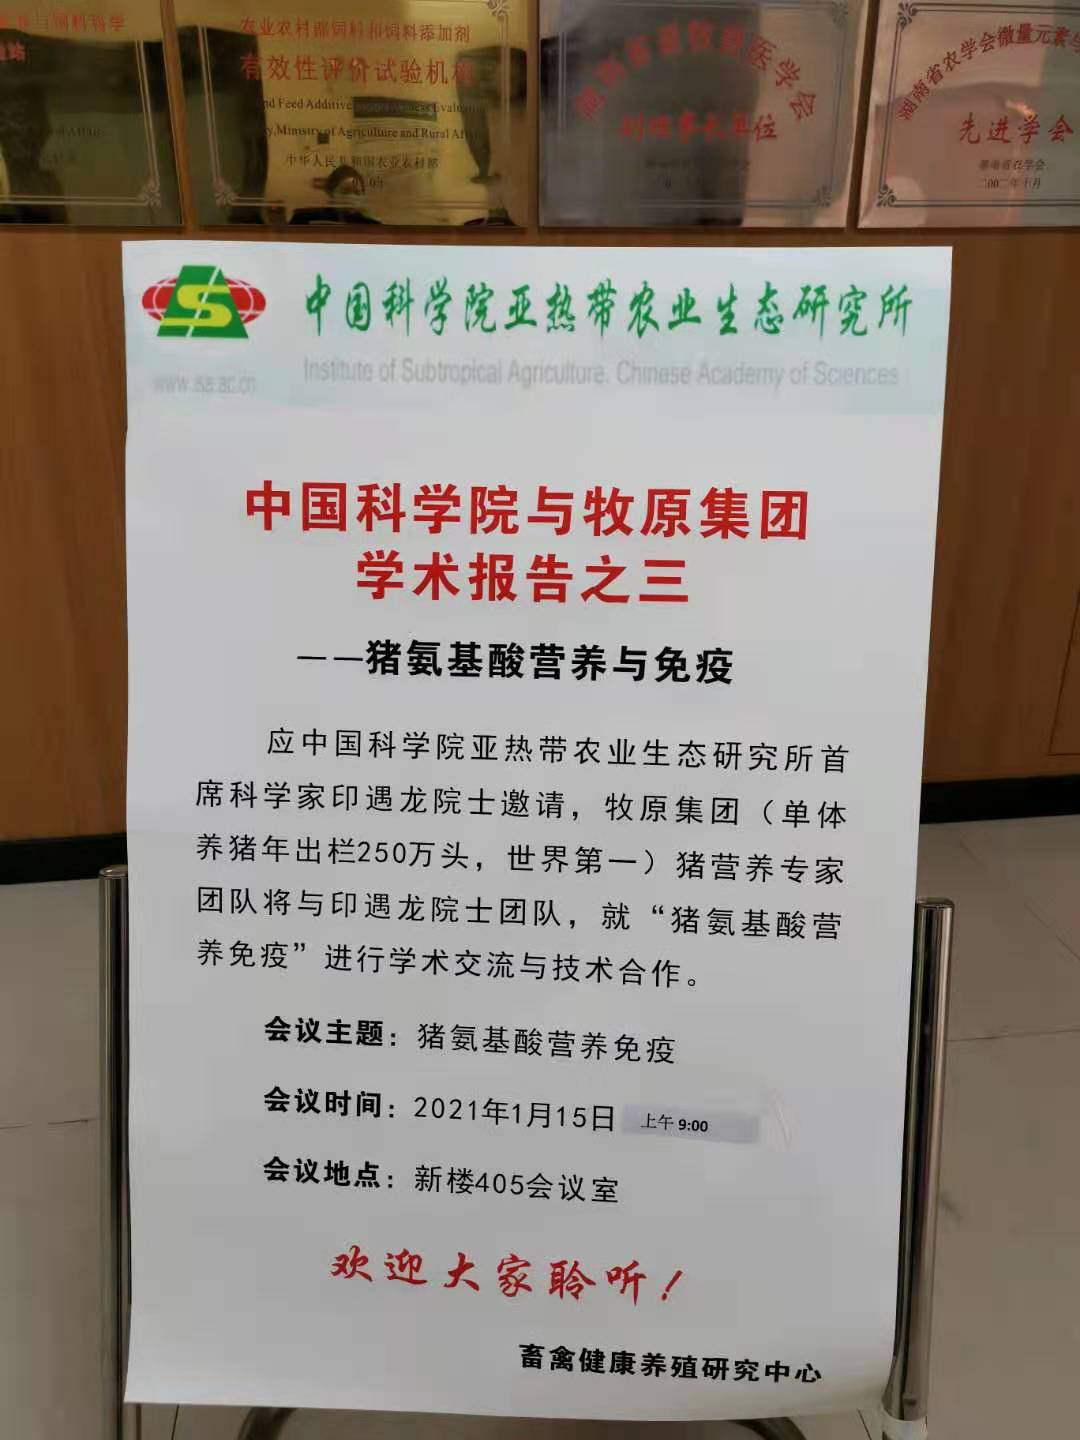 Academic Exchange Seminar between Chinese Academy of Sciences and Muyuan Group-Pig Amino Acid Nutrition and Immunity